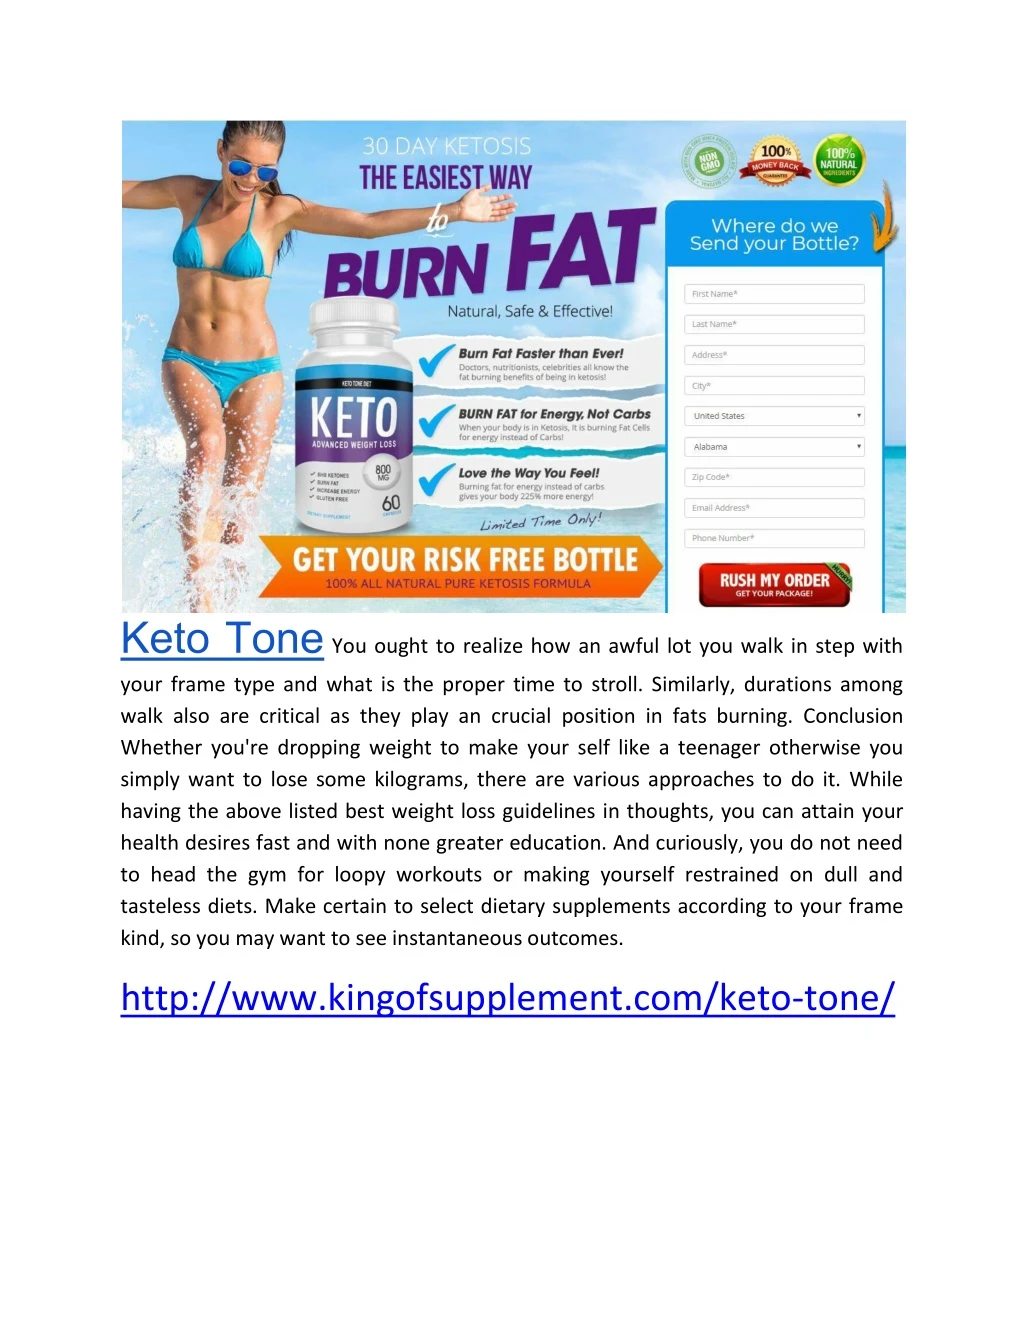 keto tone you ought to realize how an awful